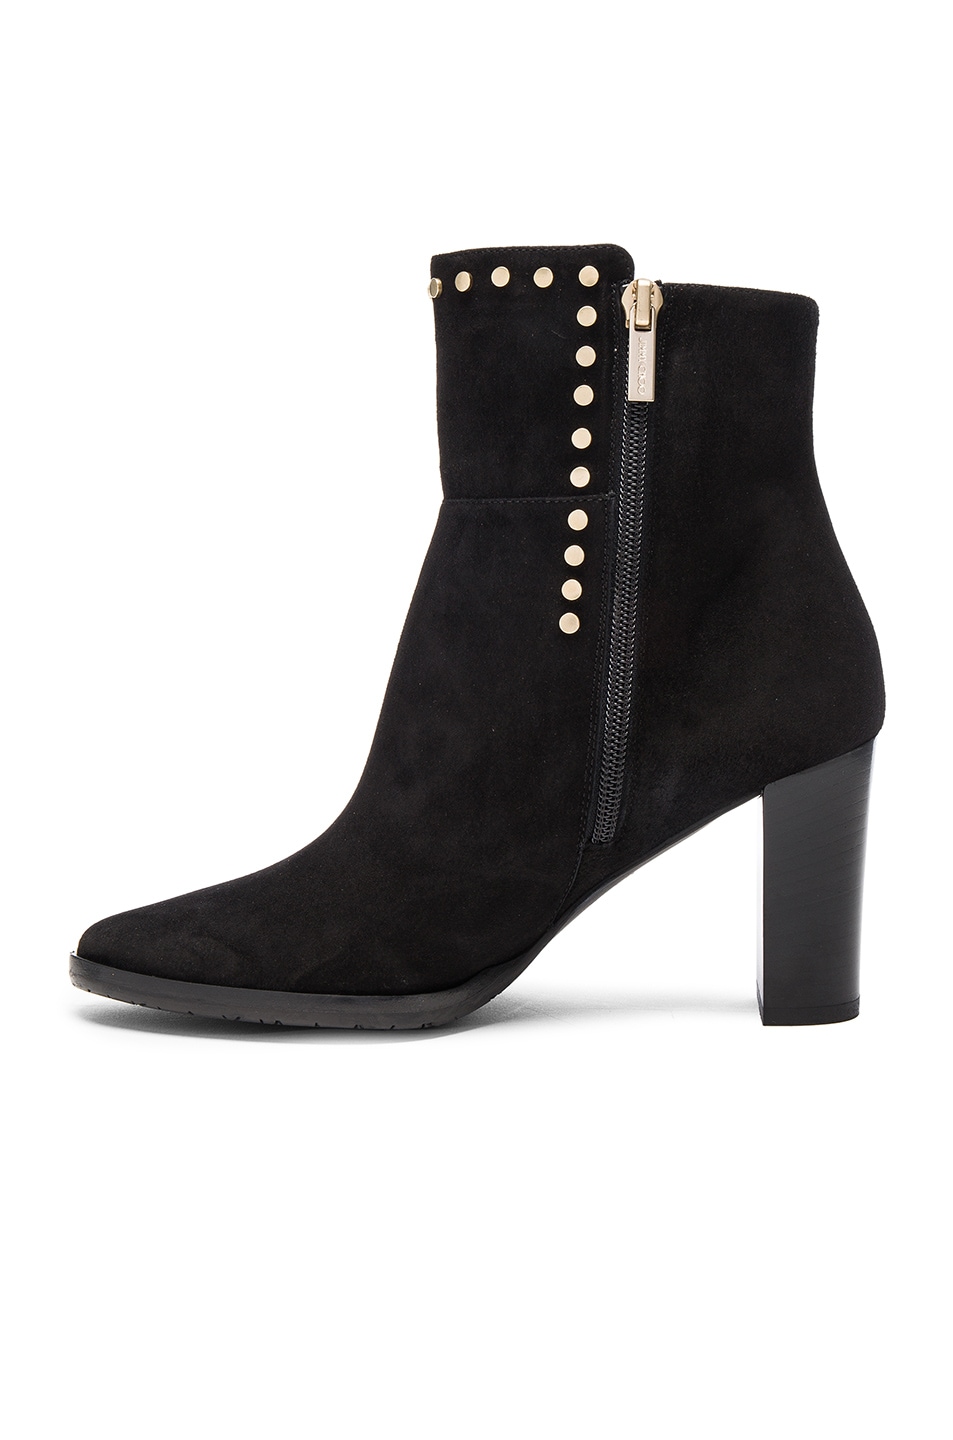 JIMMY CHOO Harlow 80 Black Suede Boots With Stud Trim | ModeSens